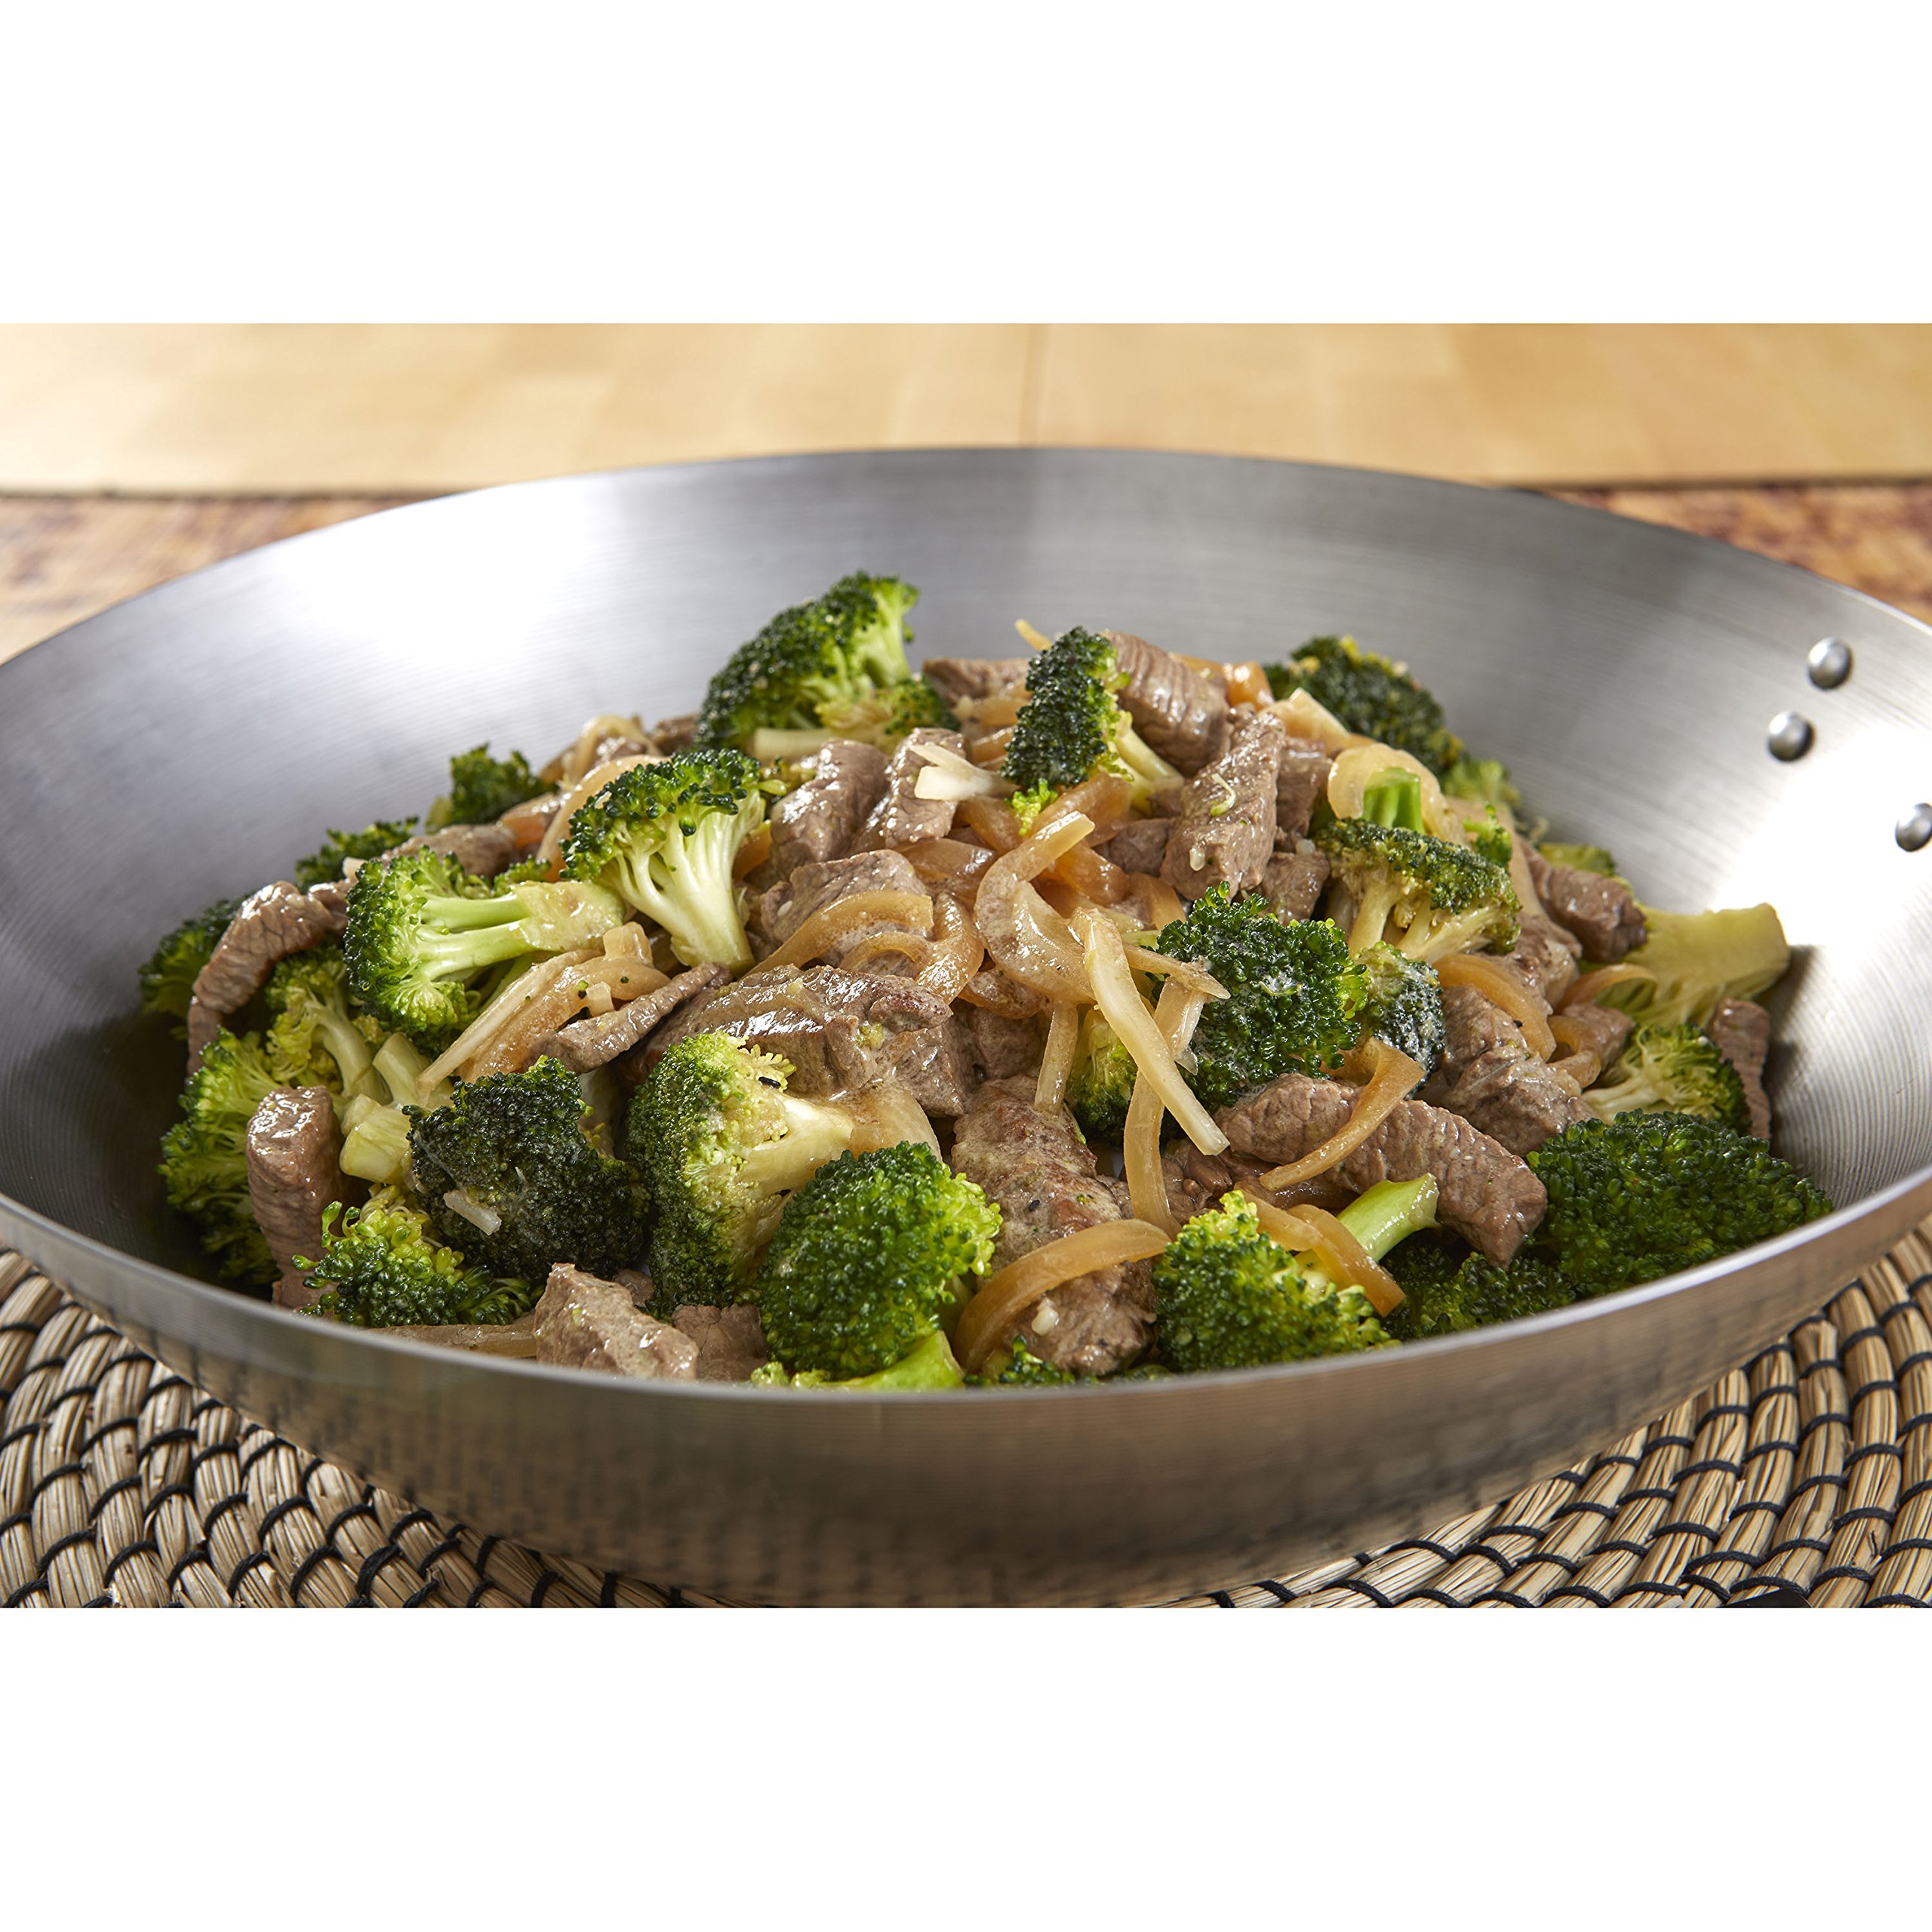 Imusa USA WPAN-10018 Non-coated Wok with Wooden Handles 14-Inch, Silver